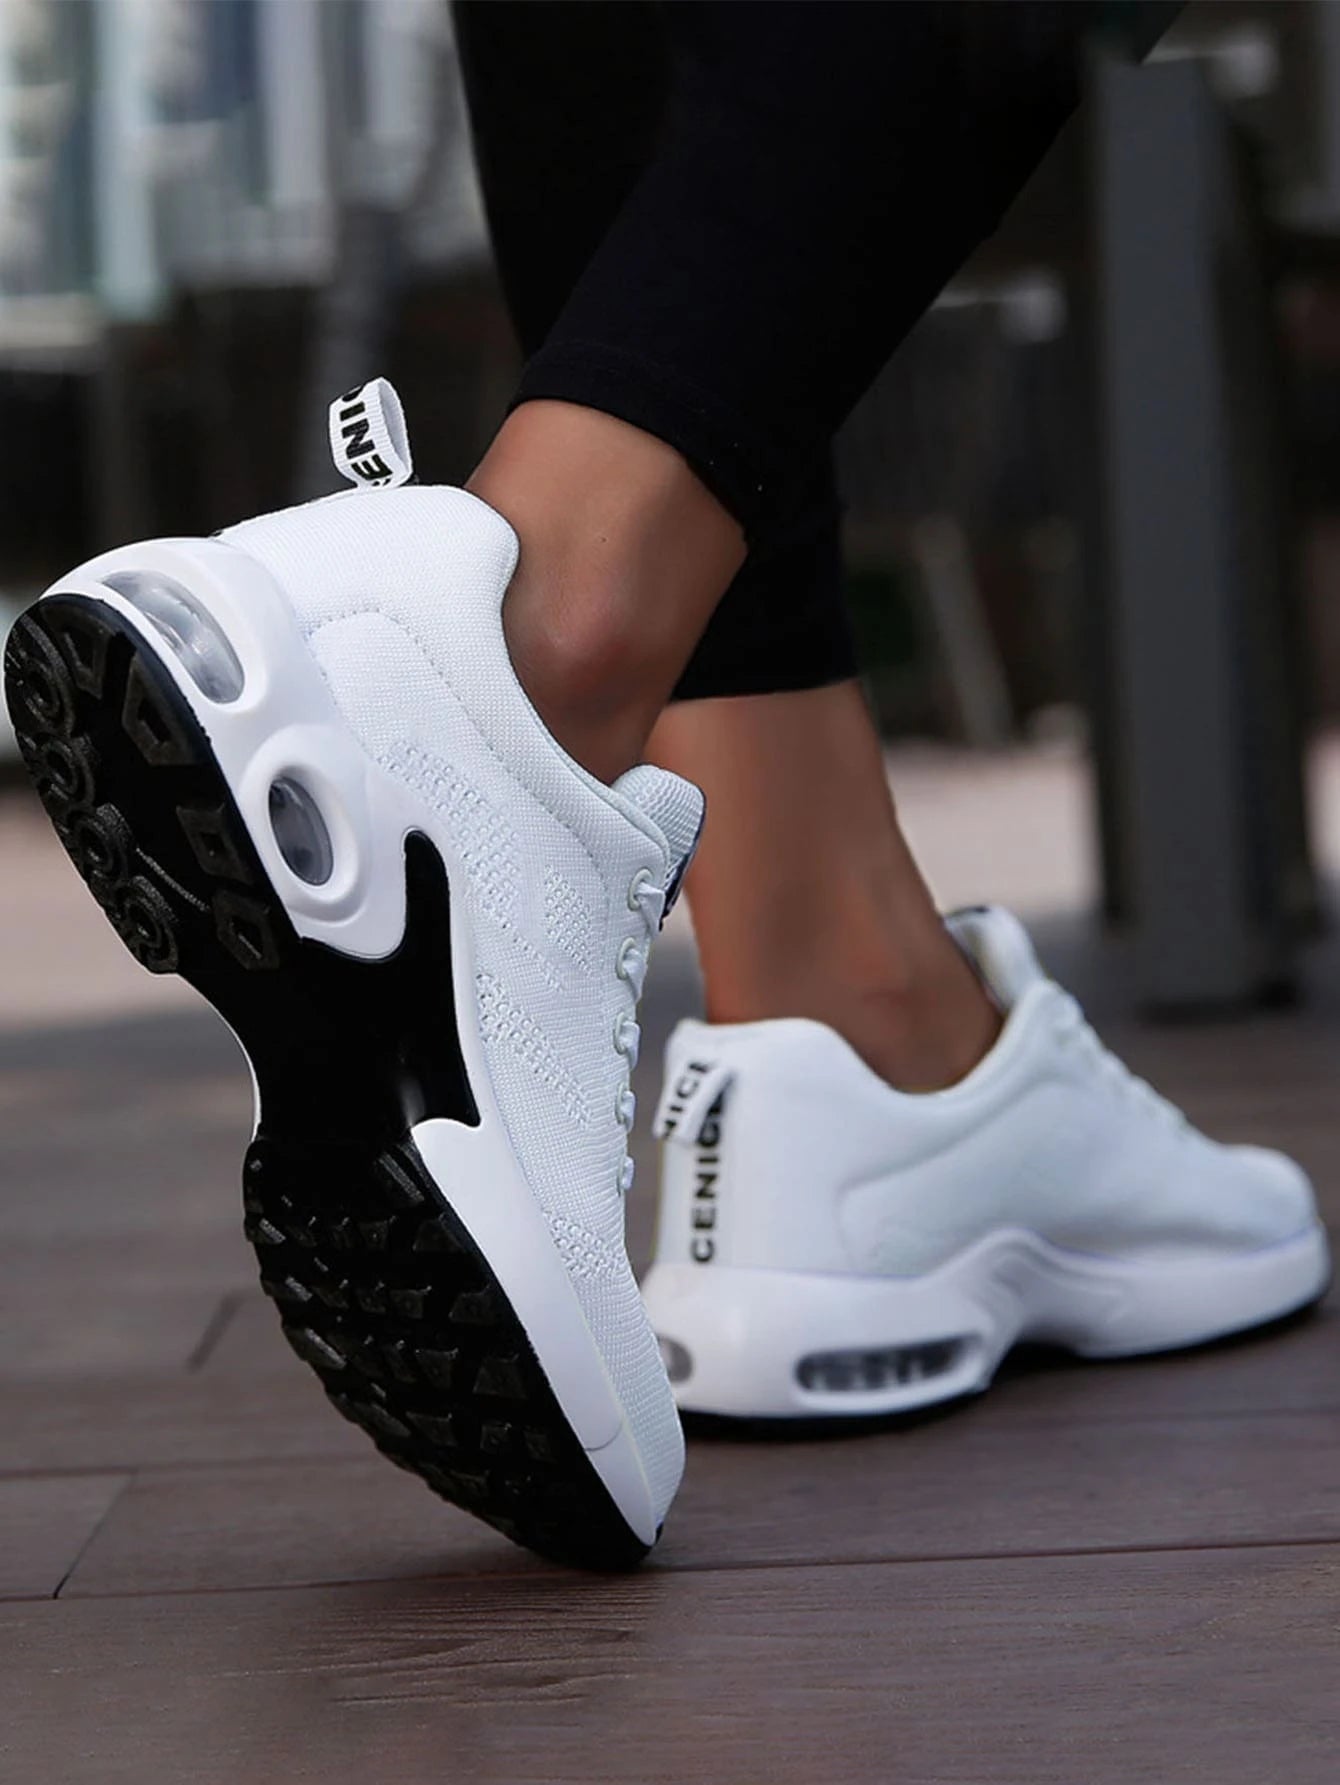 Women White Lace-Up Front Running Shoes